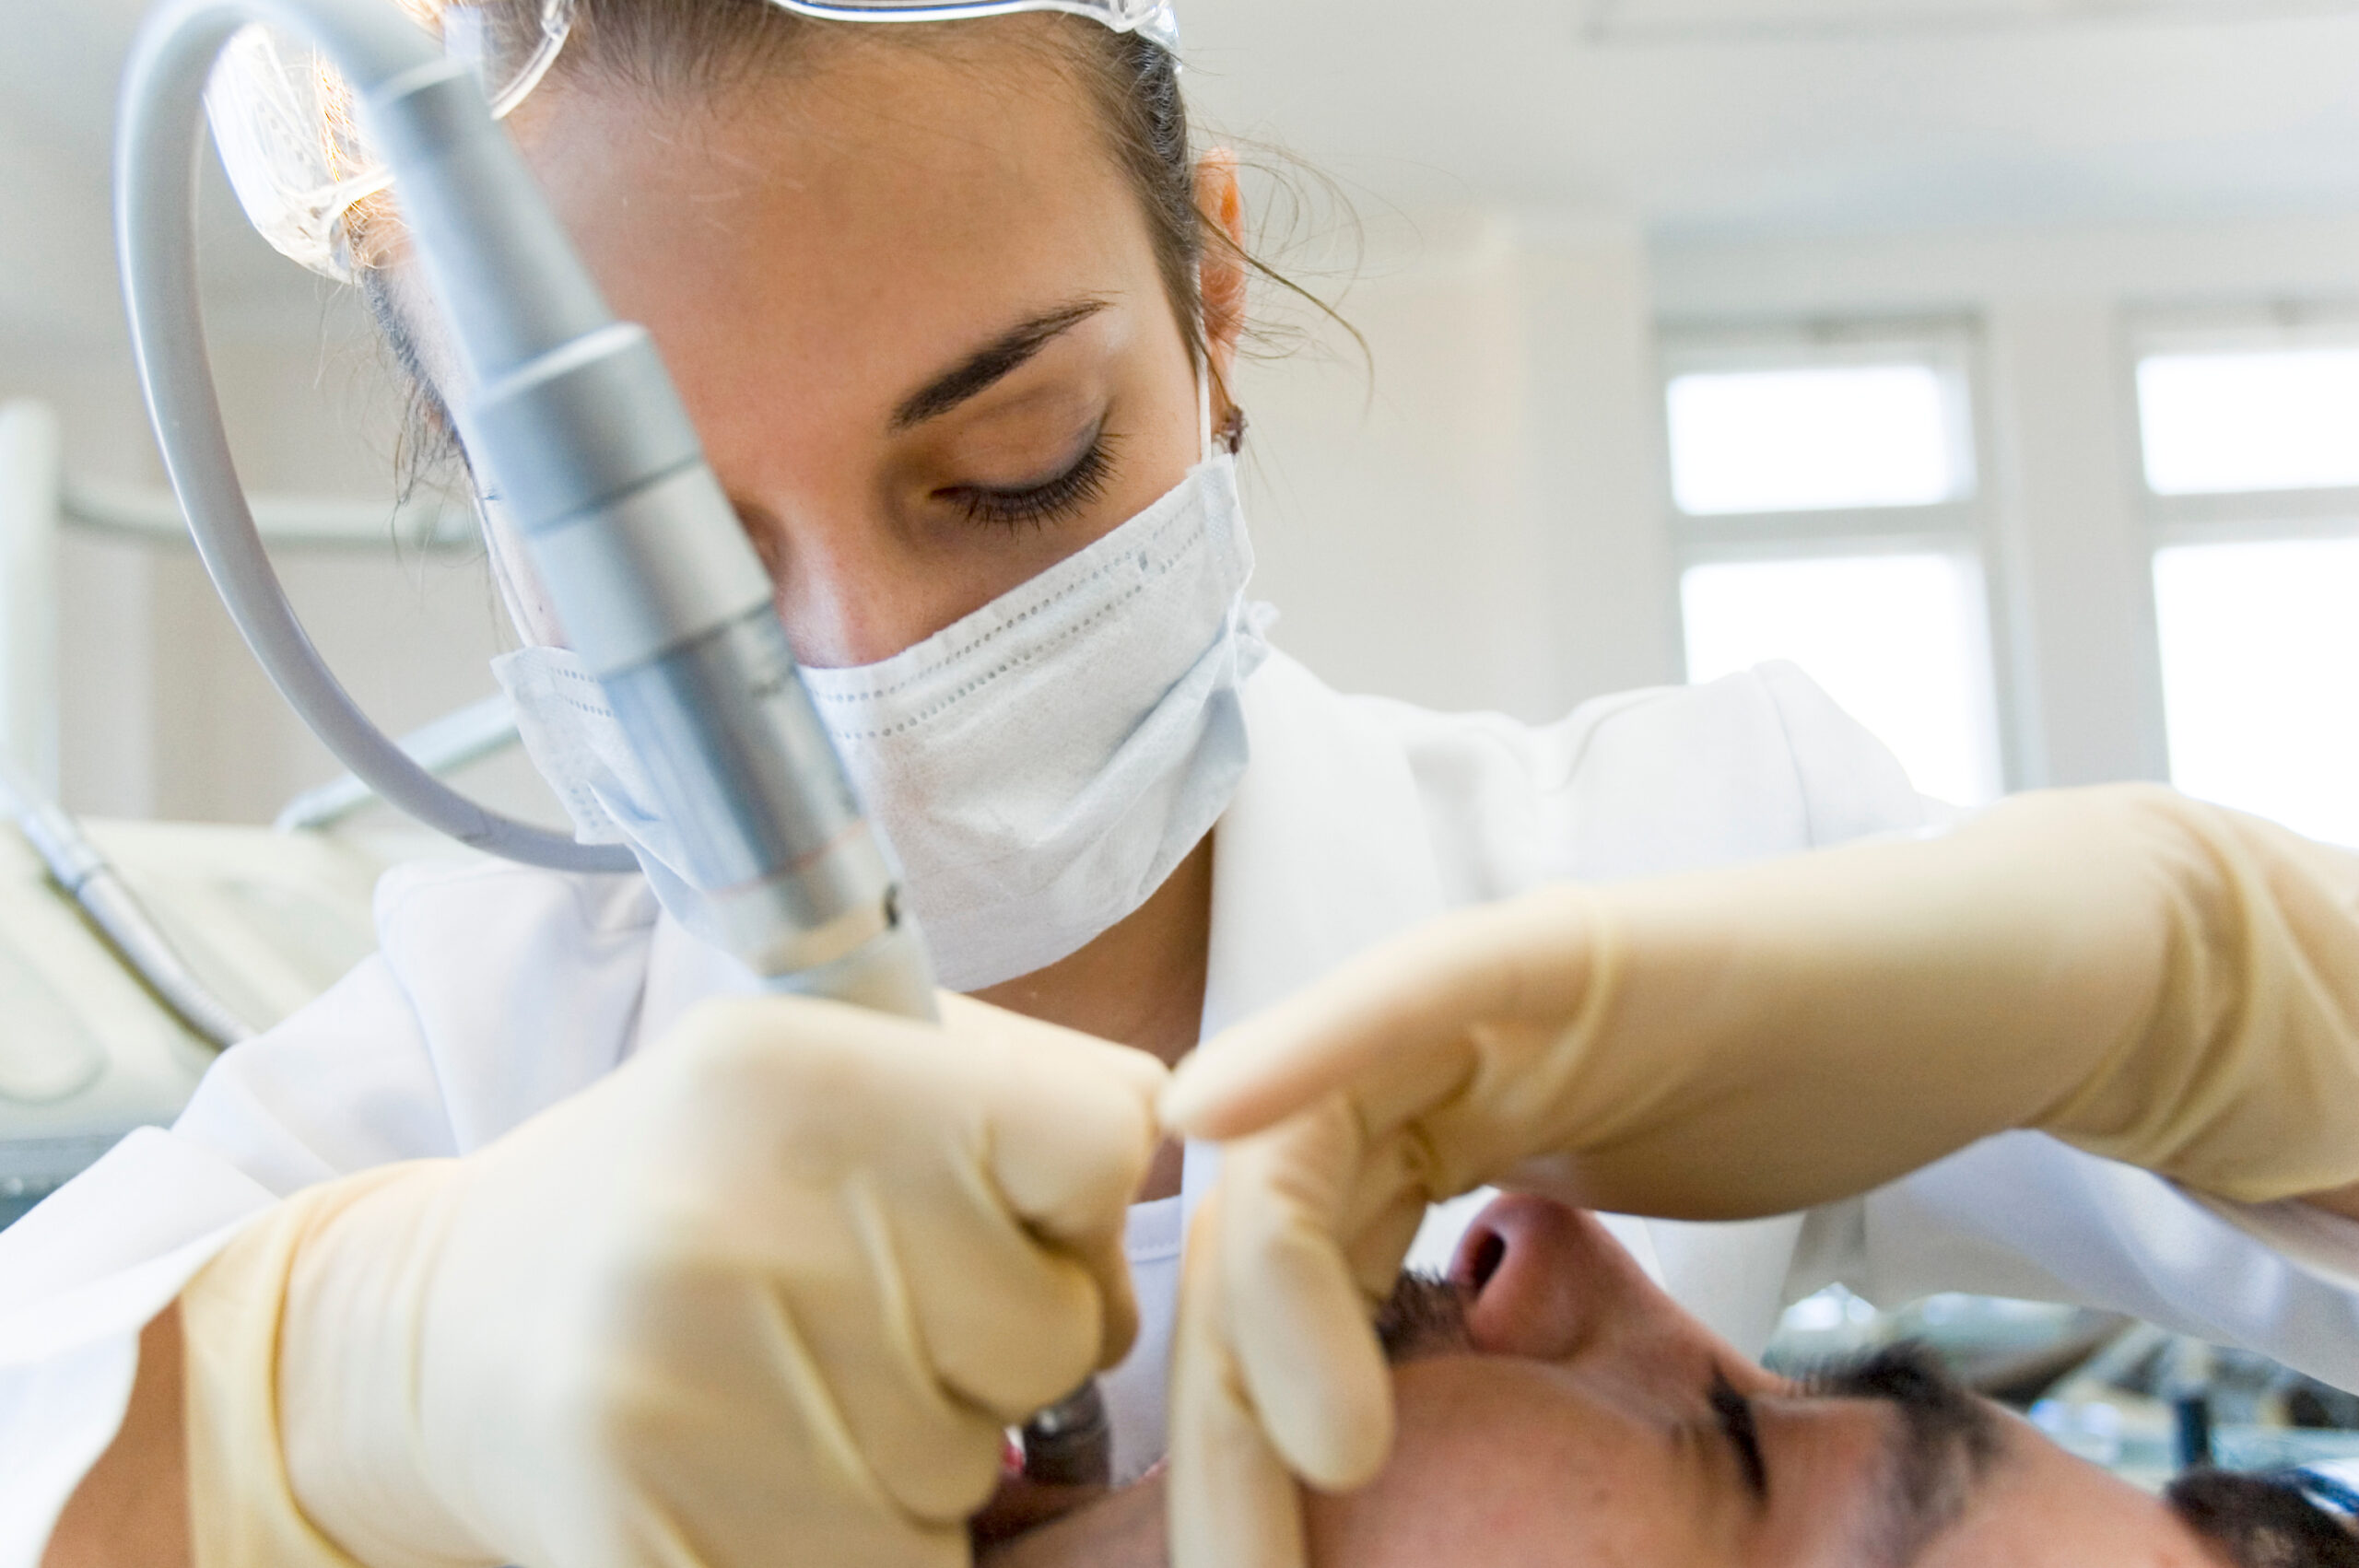 sedation dentistry what you should know